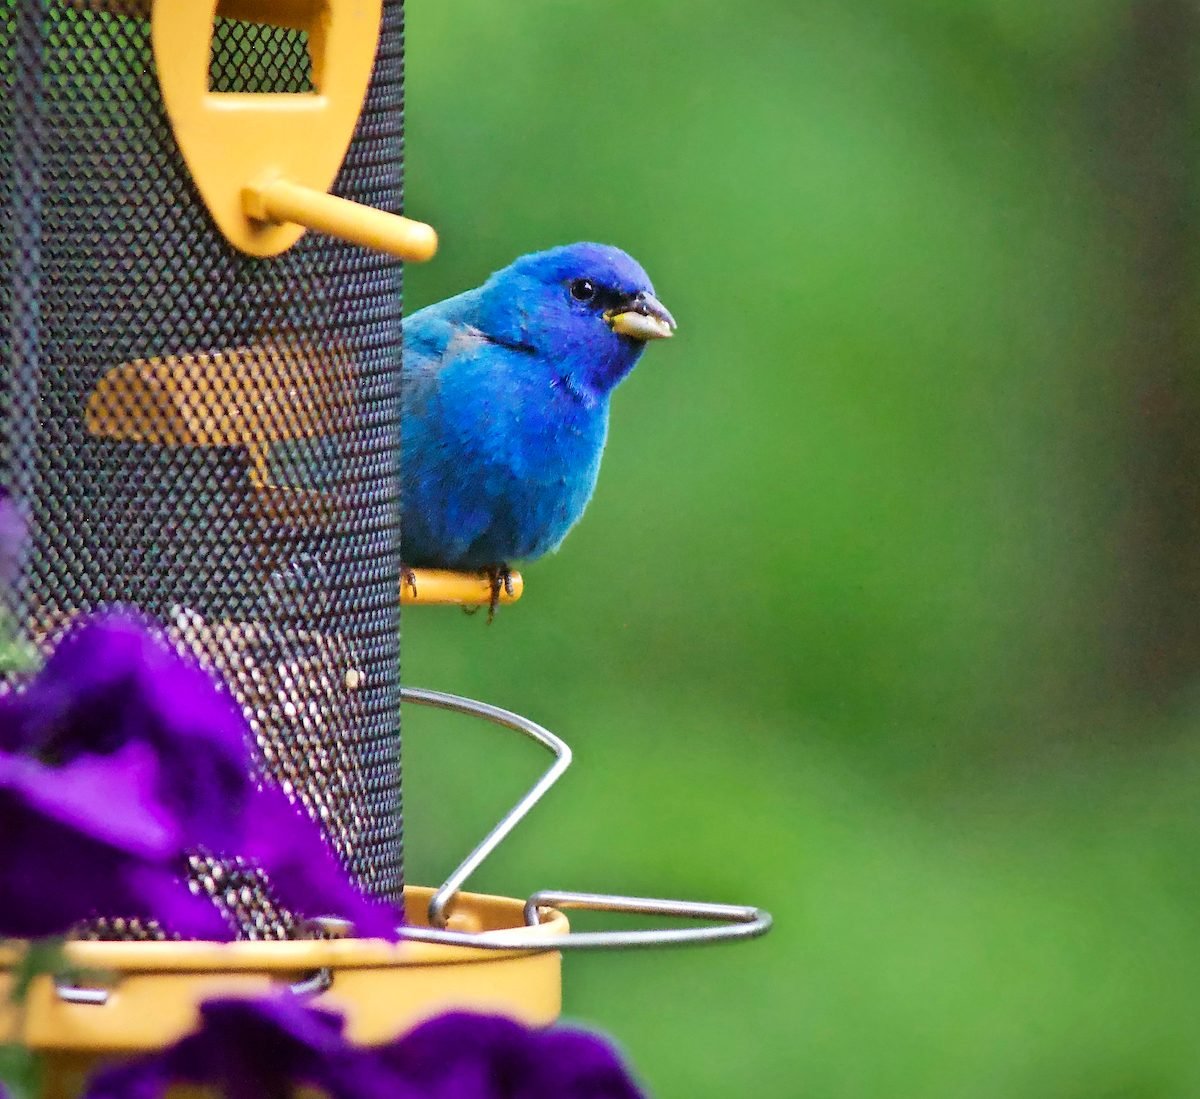 Attract Indigo Buntings With Their Favorite Foods